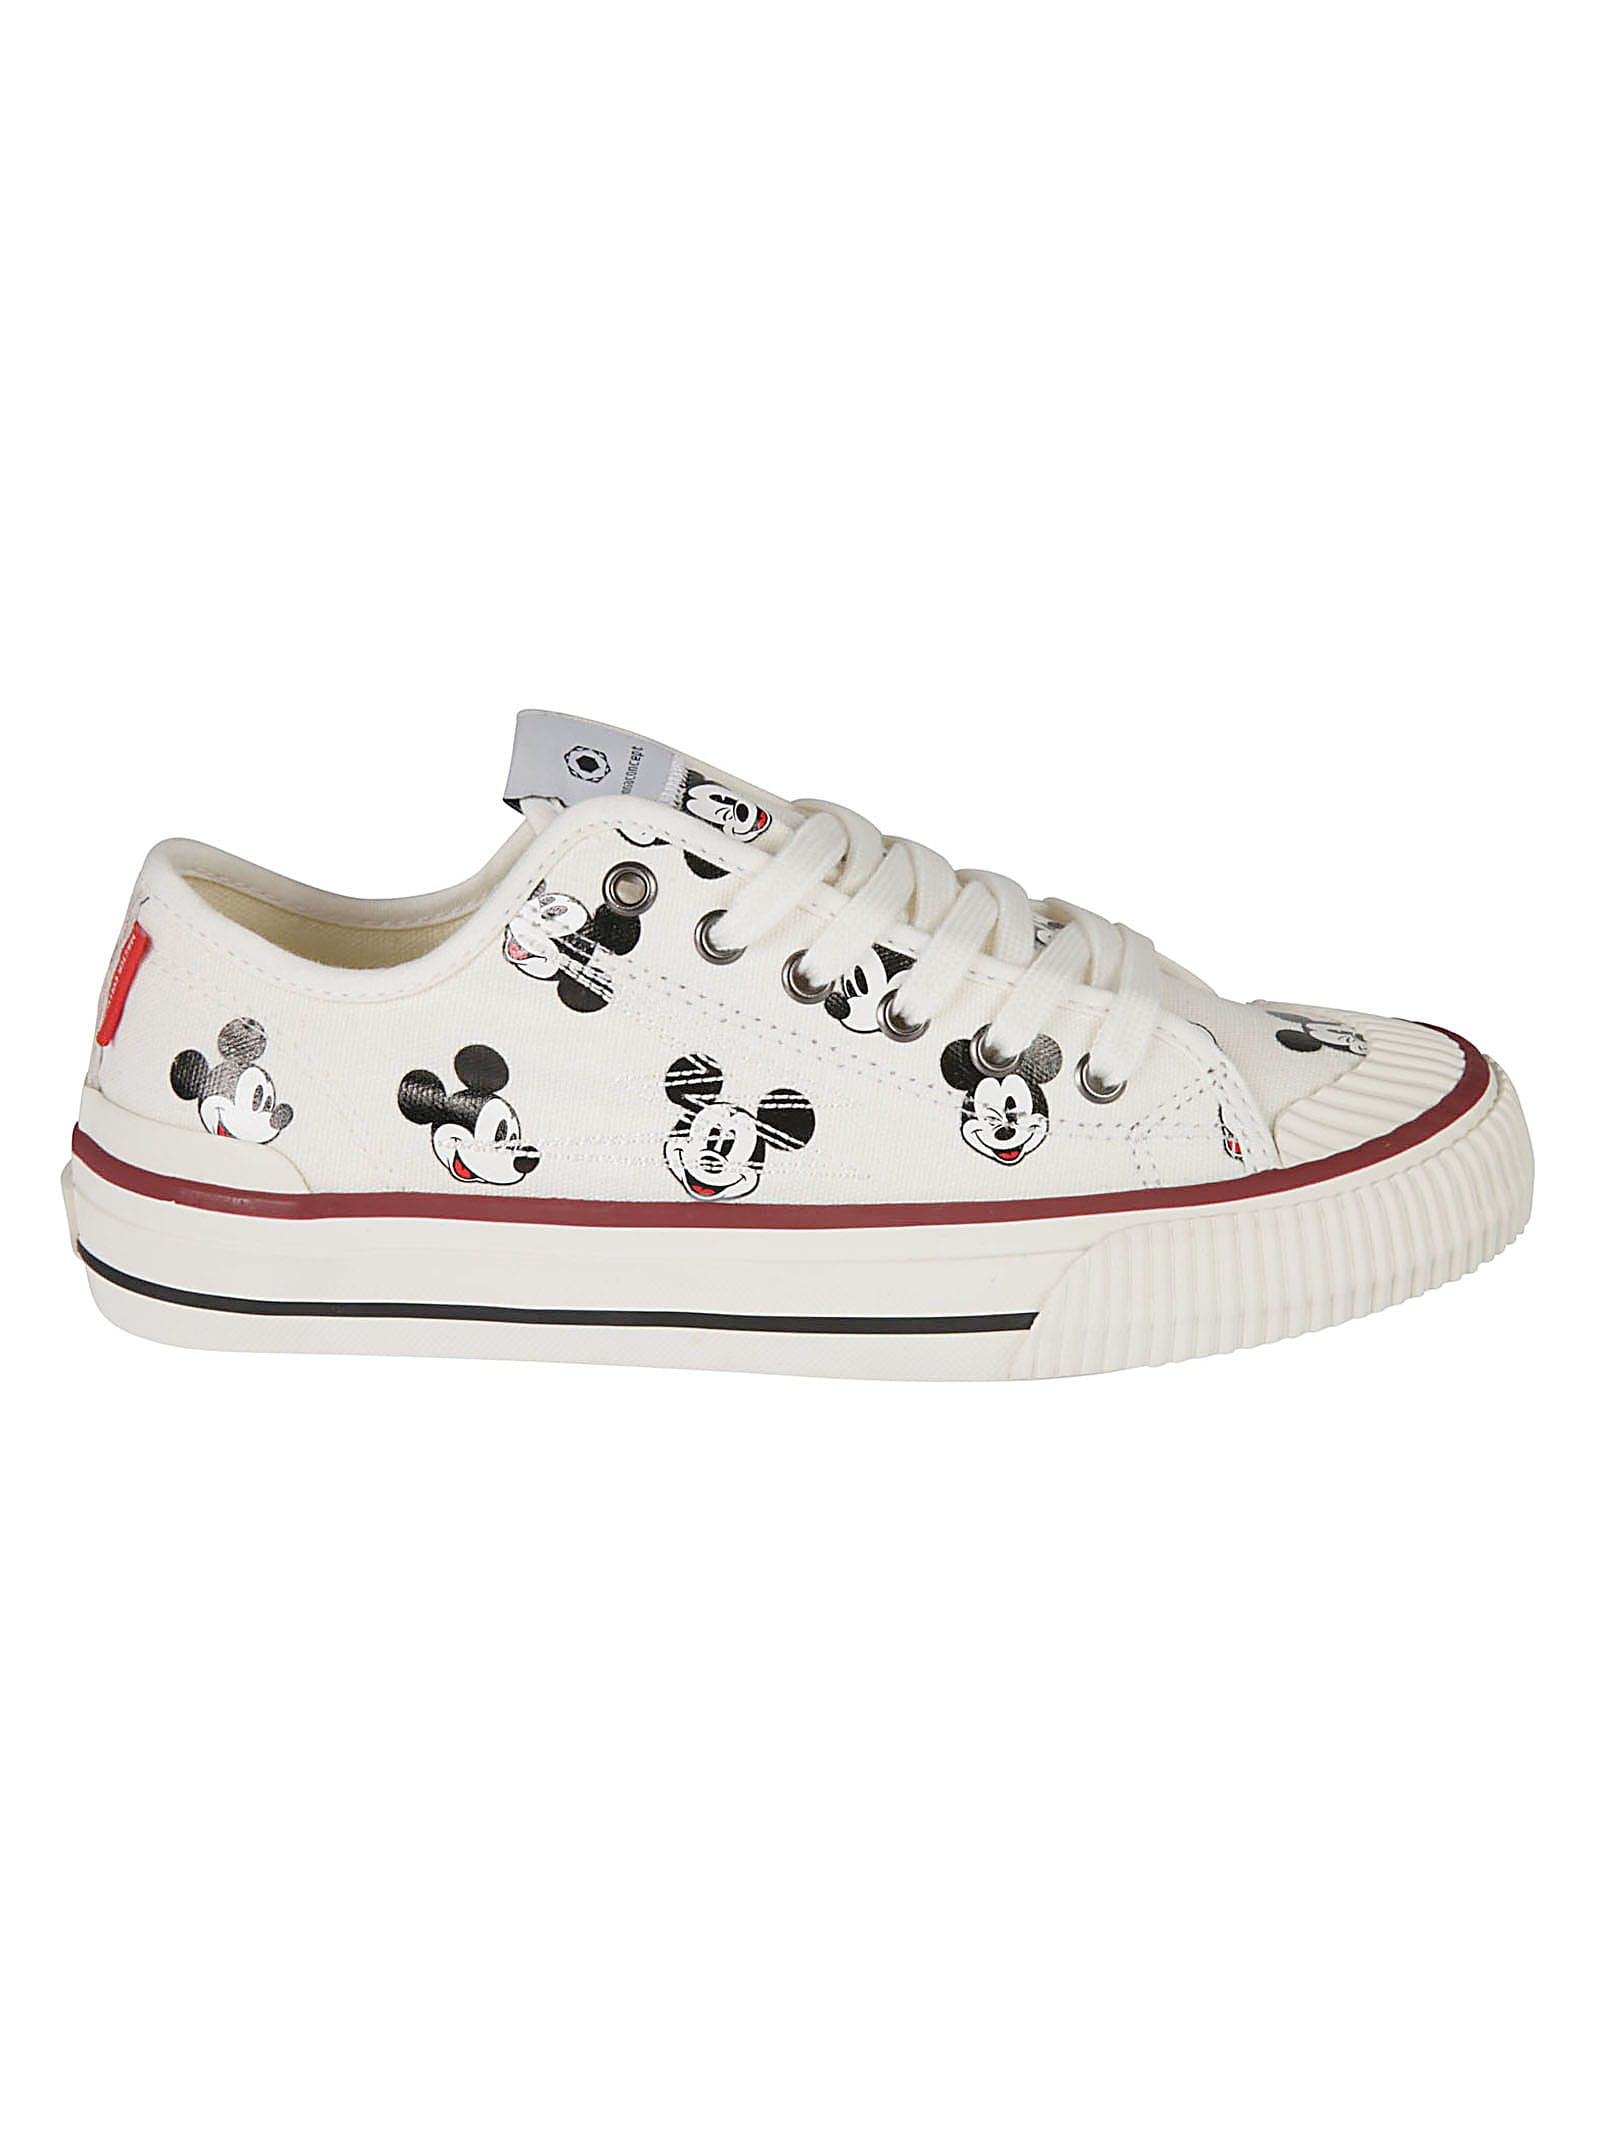 MOA MASTER OF ARTS MICKEY MOUSE PRINTED SNEAKERS,11822605